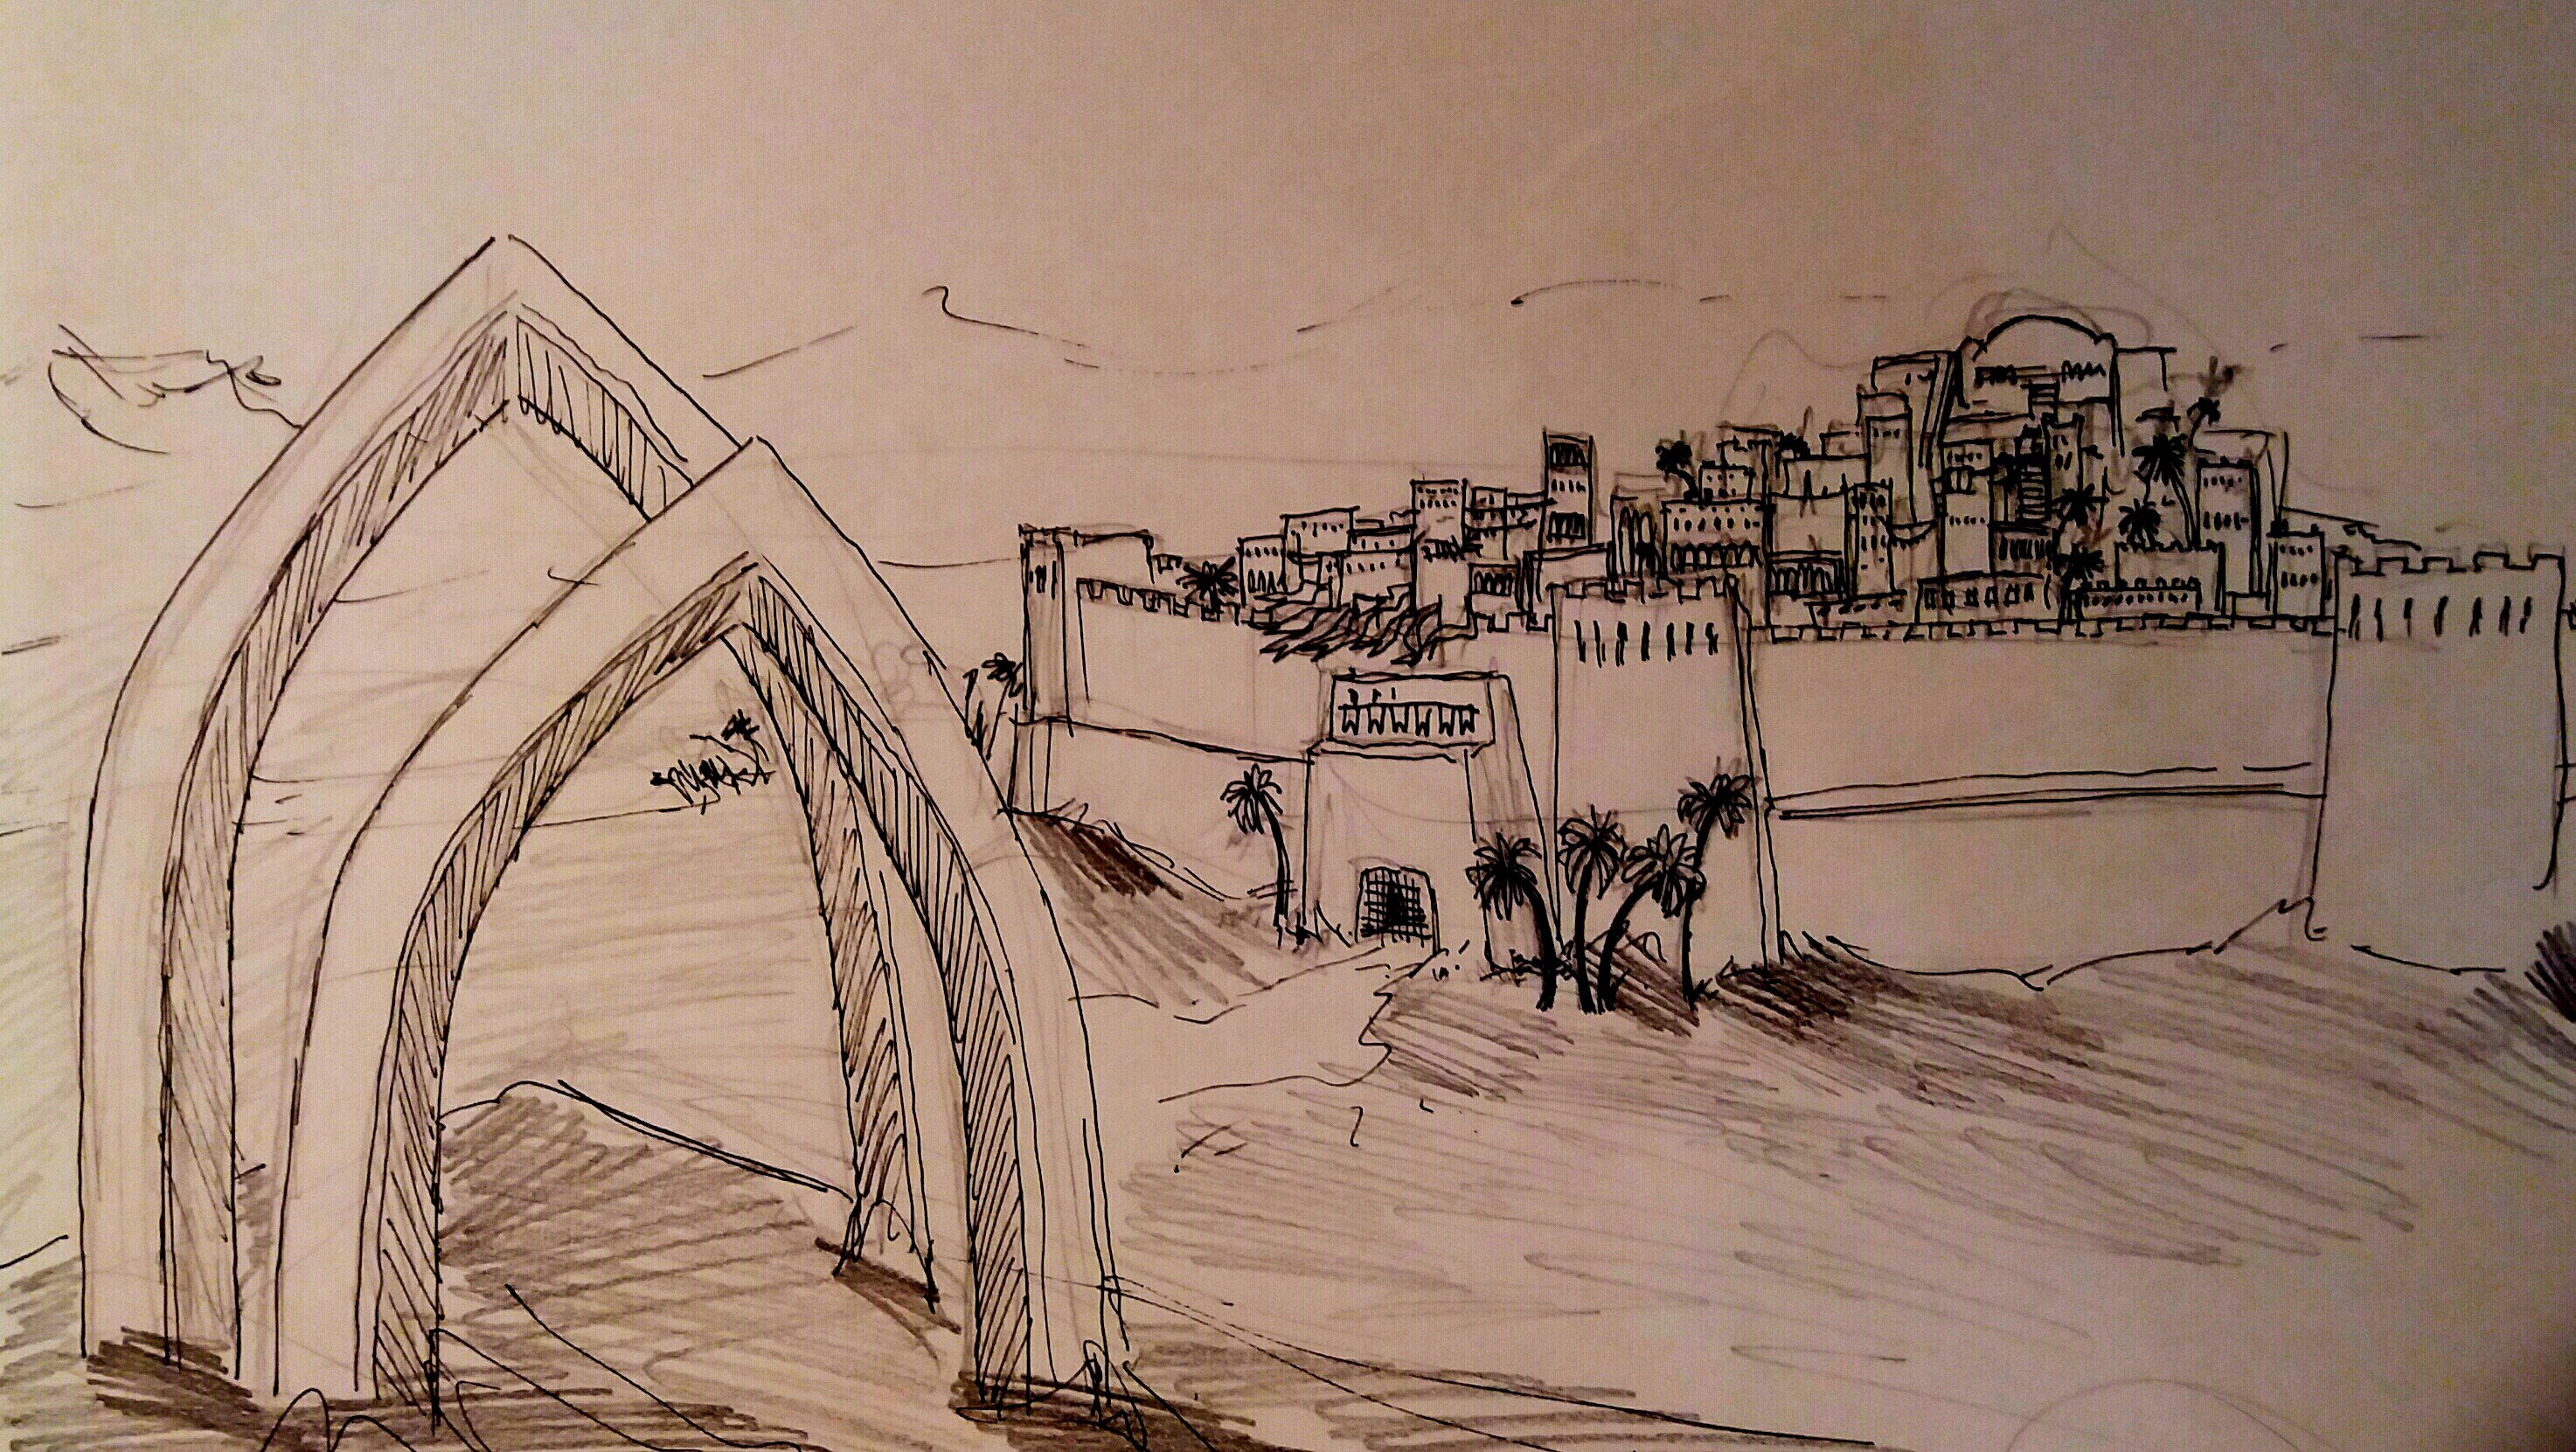 two arches on a desert overlooking a walled city.